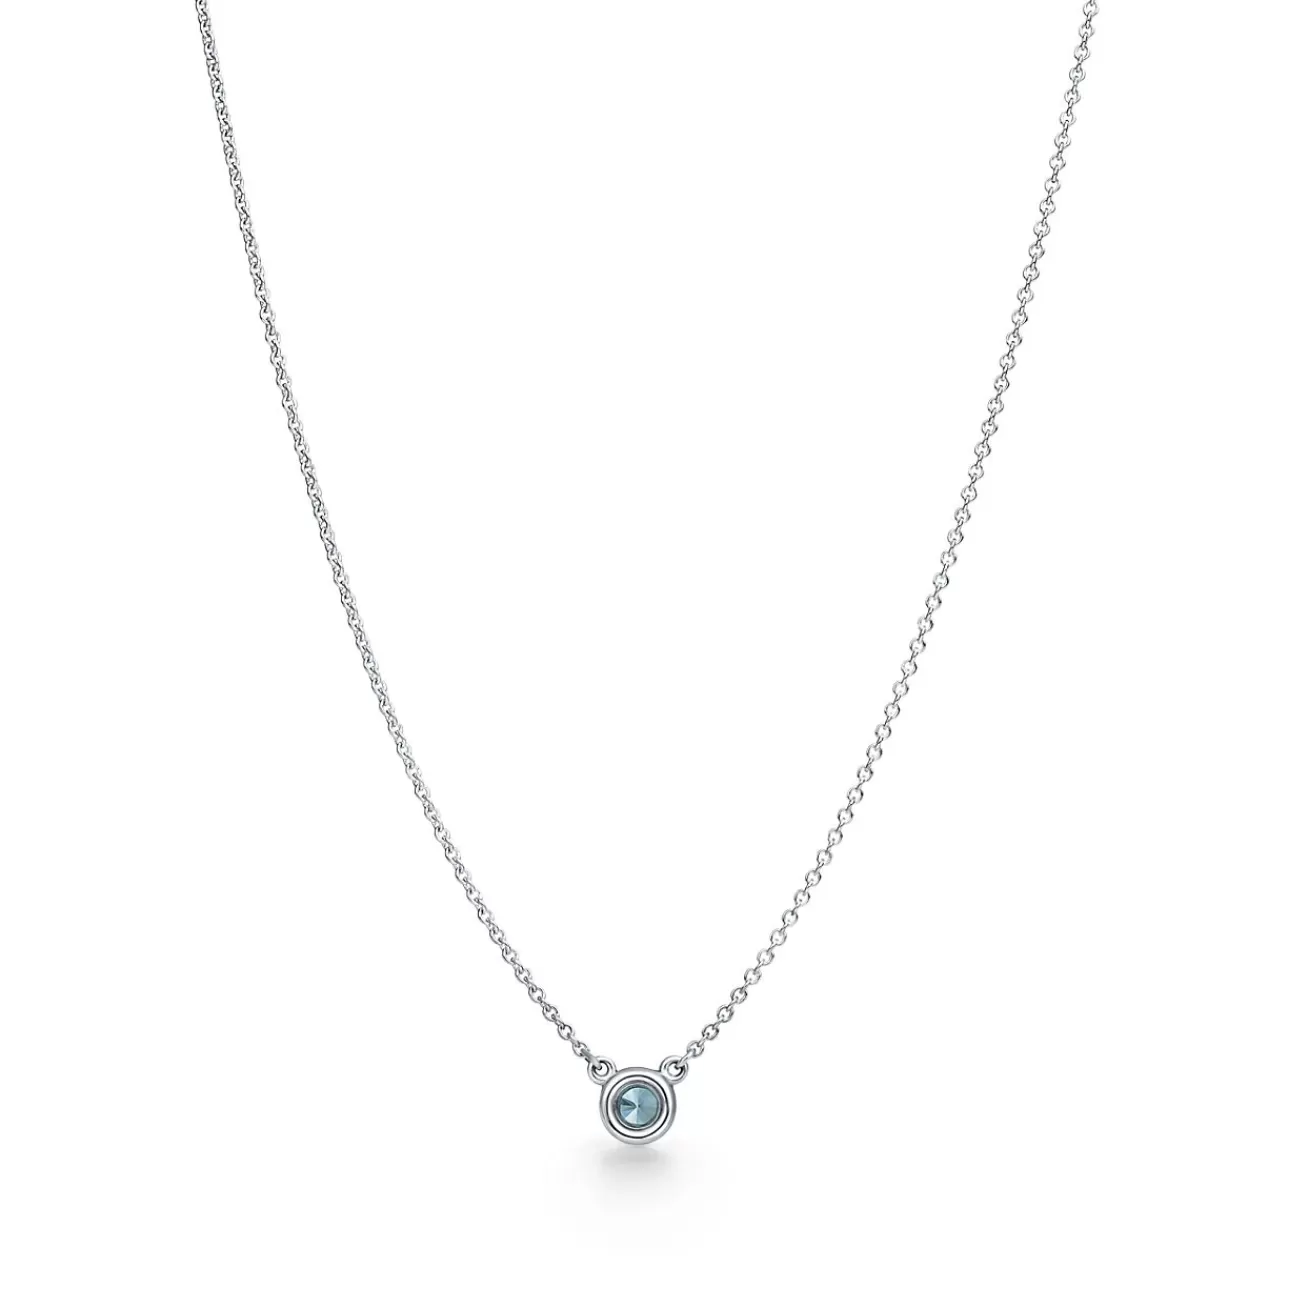 Tiffany & Co. Elsa Peretti® Color by the Yard Aquamarine Pendant in Silver | ^ Necklaces & Pendants | Gifts for Her